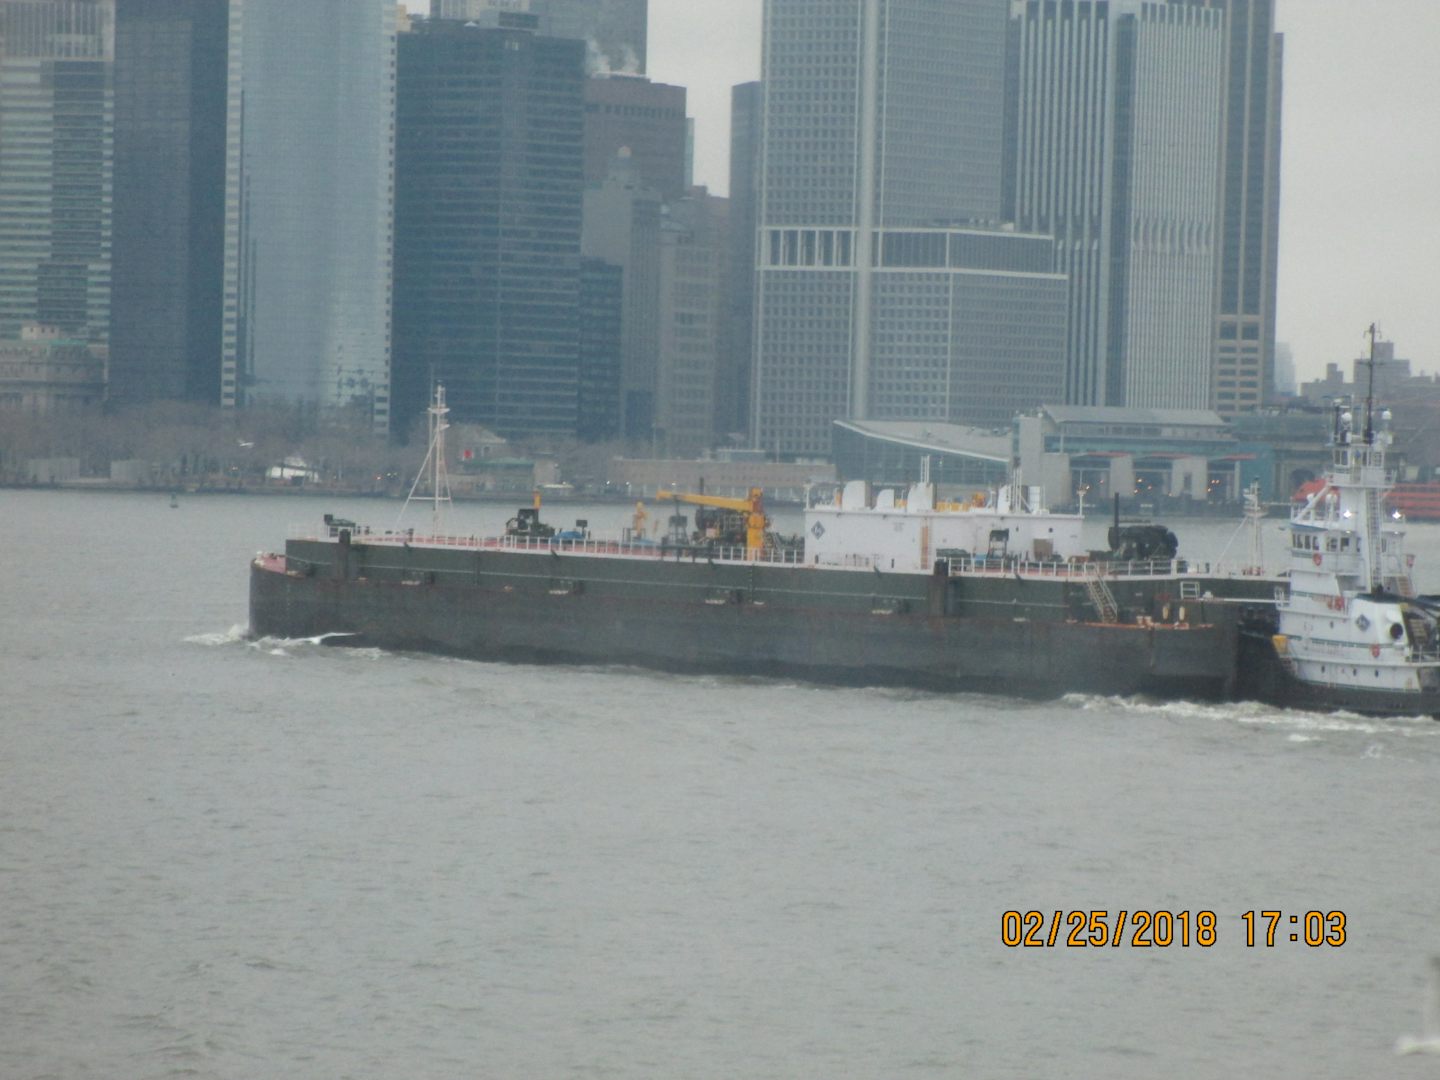 A barge in the Hudson River as we passed.